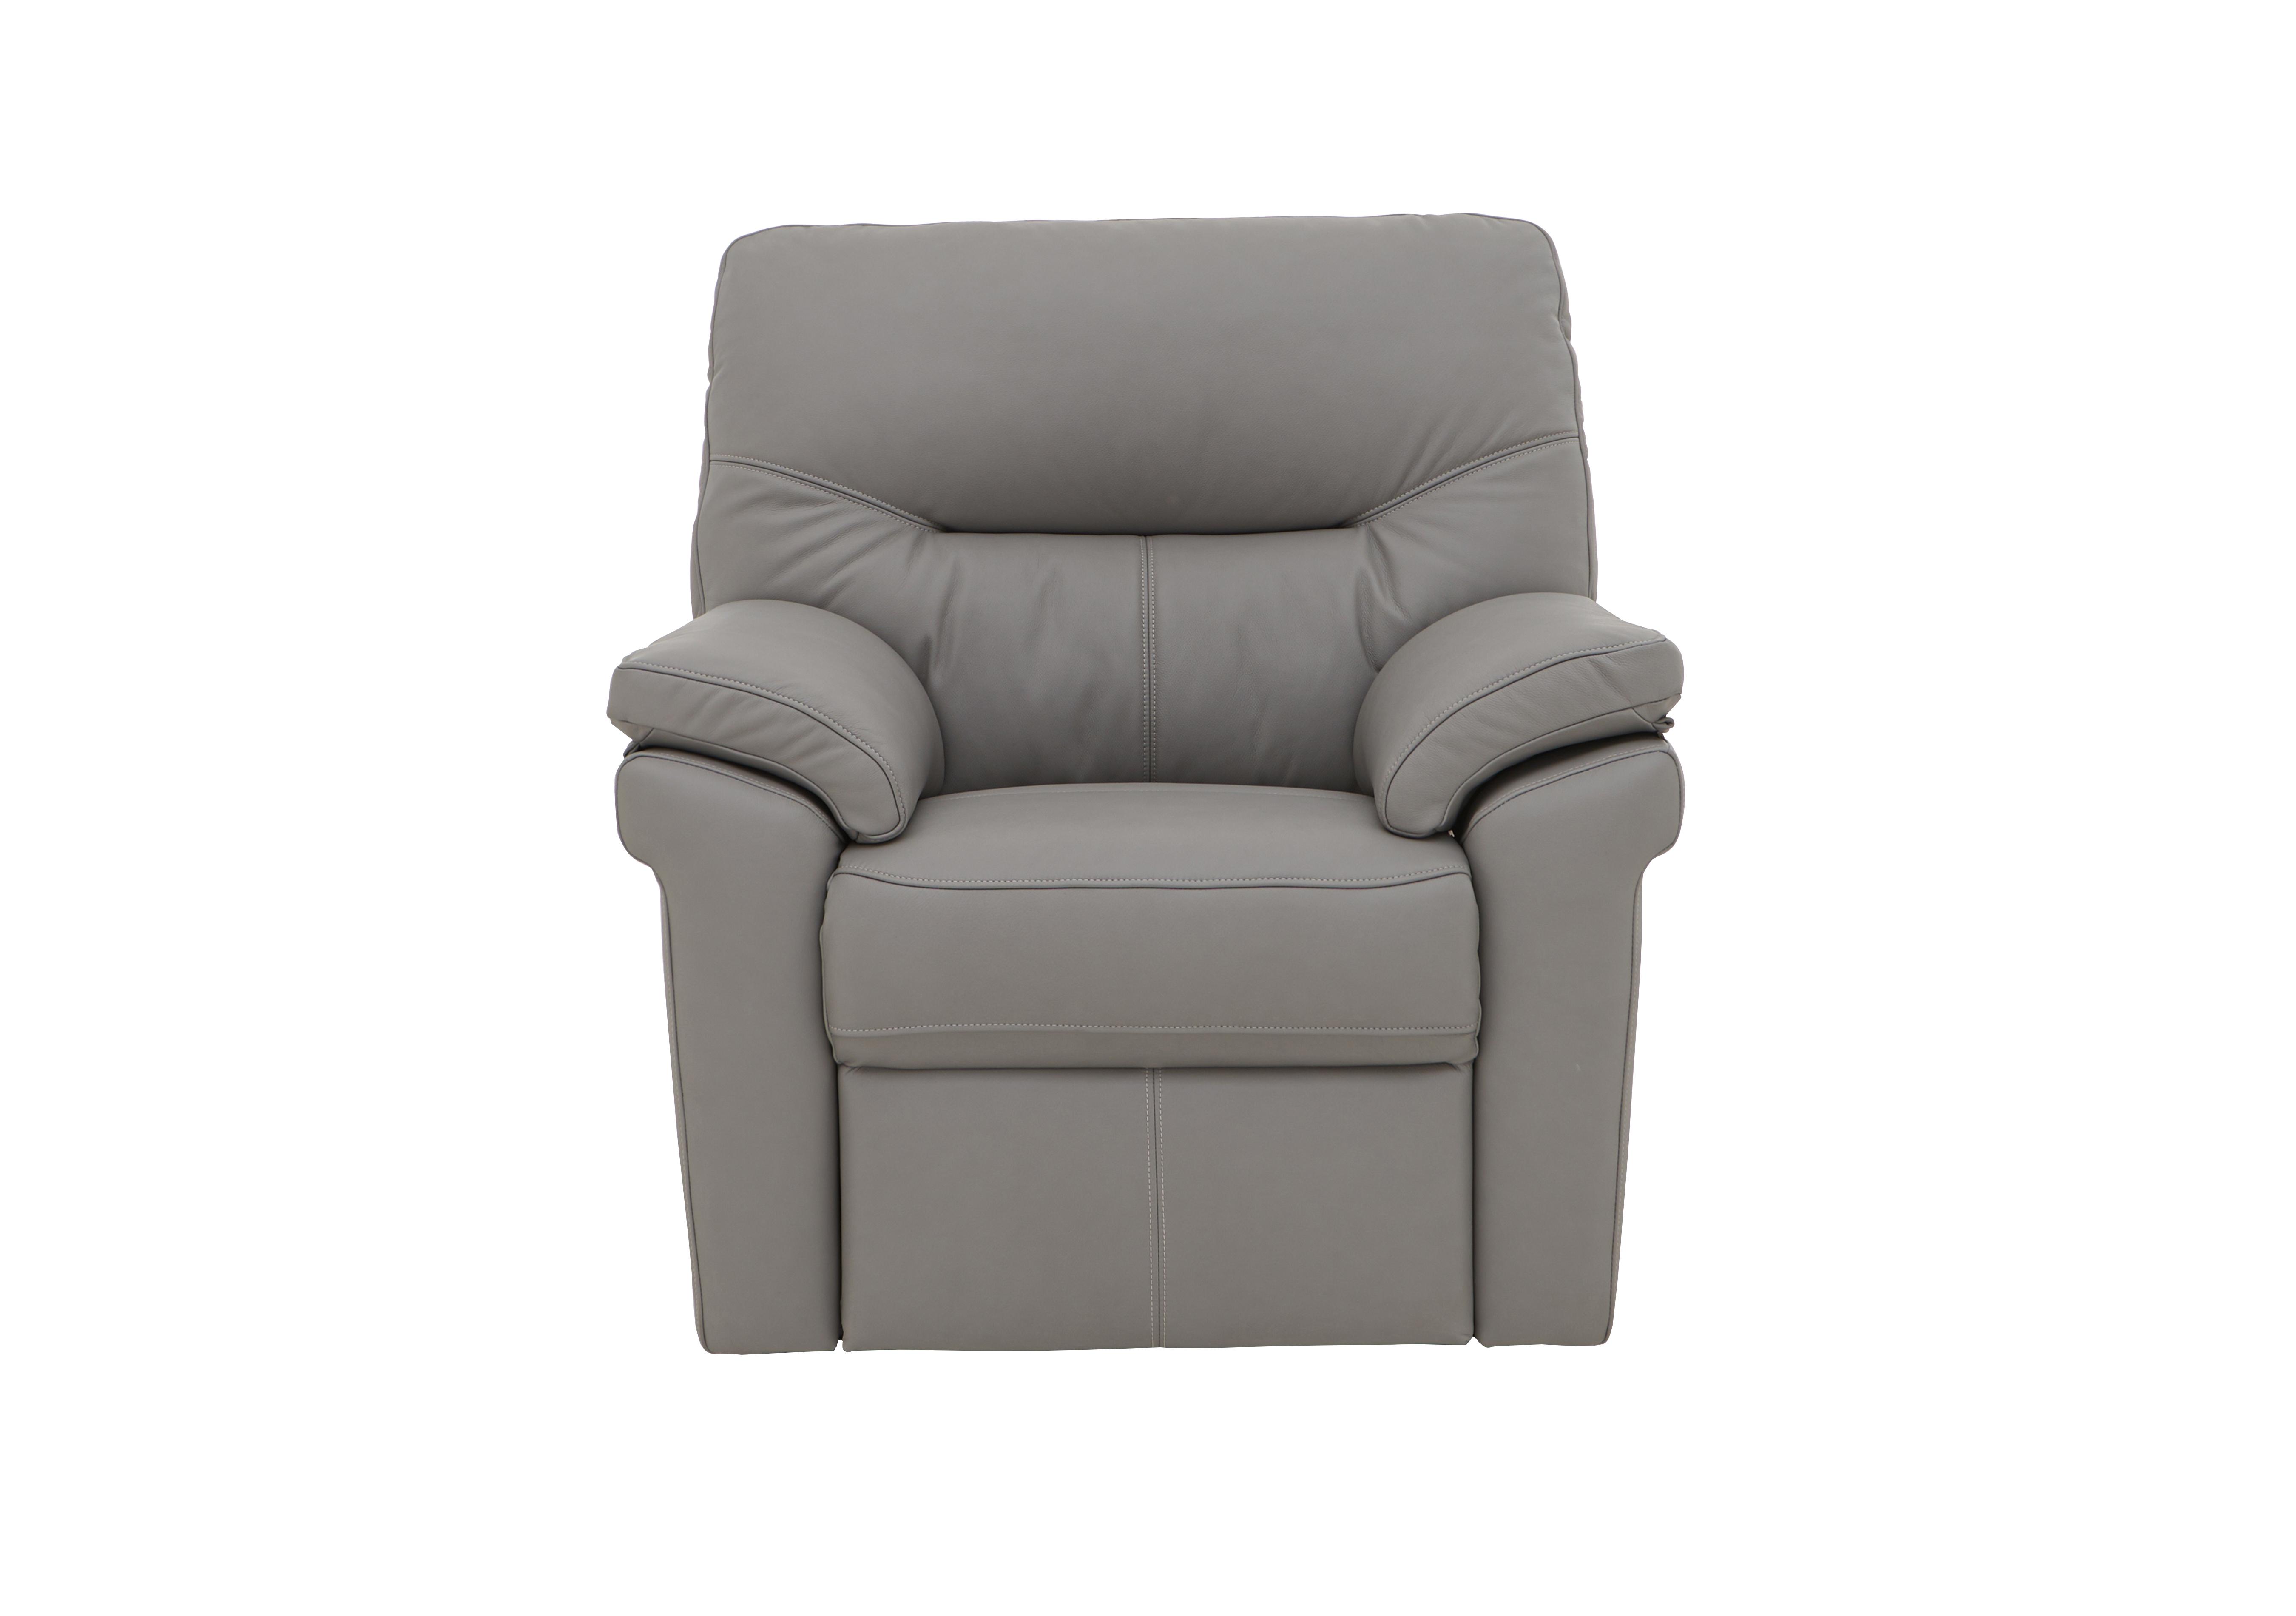 Seattle Leather Armchair in L842 Cambridge Grey on Furniture Village